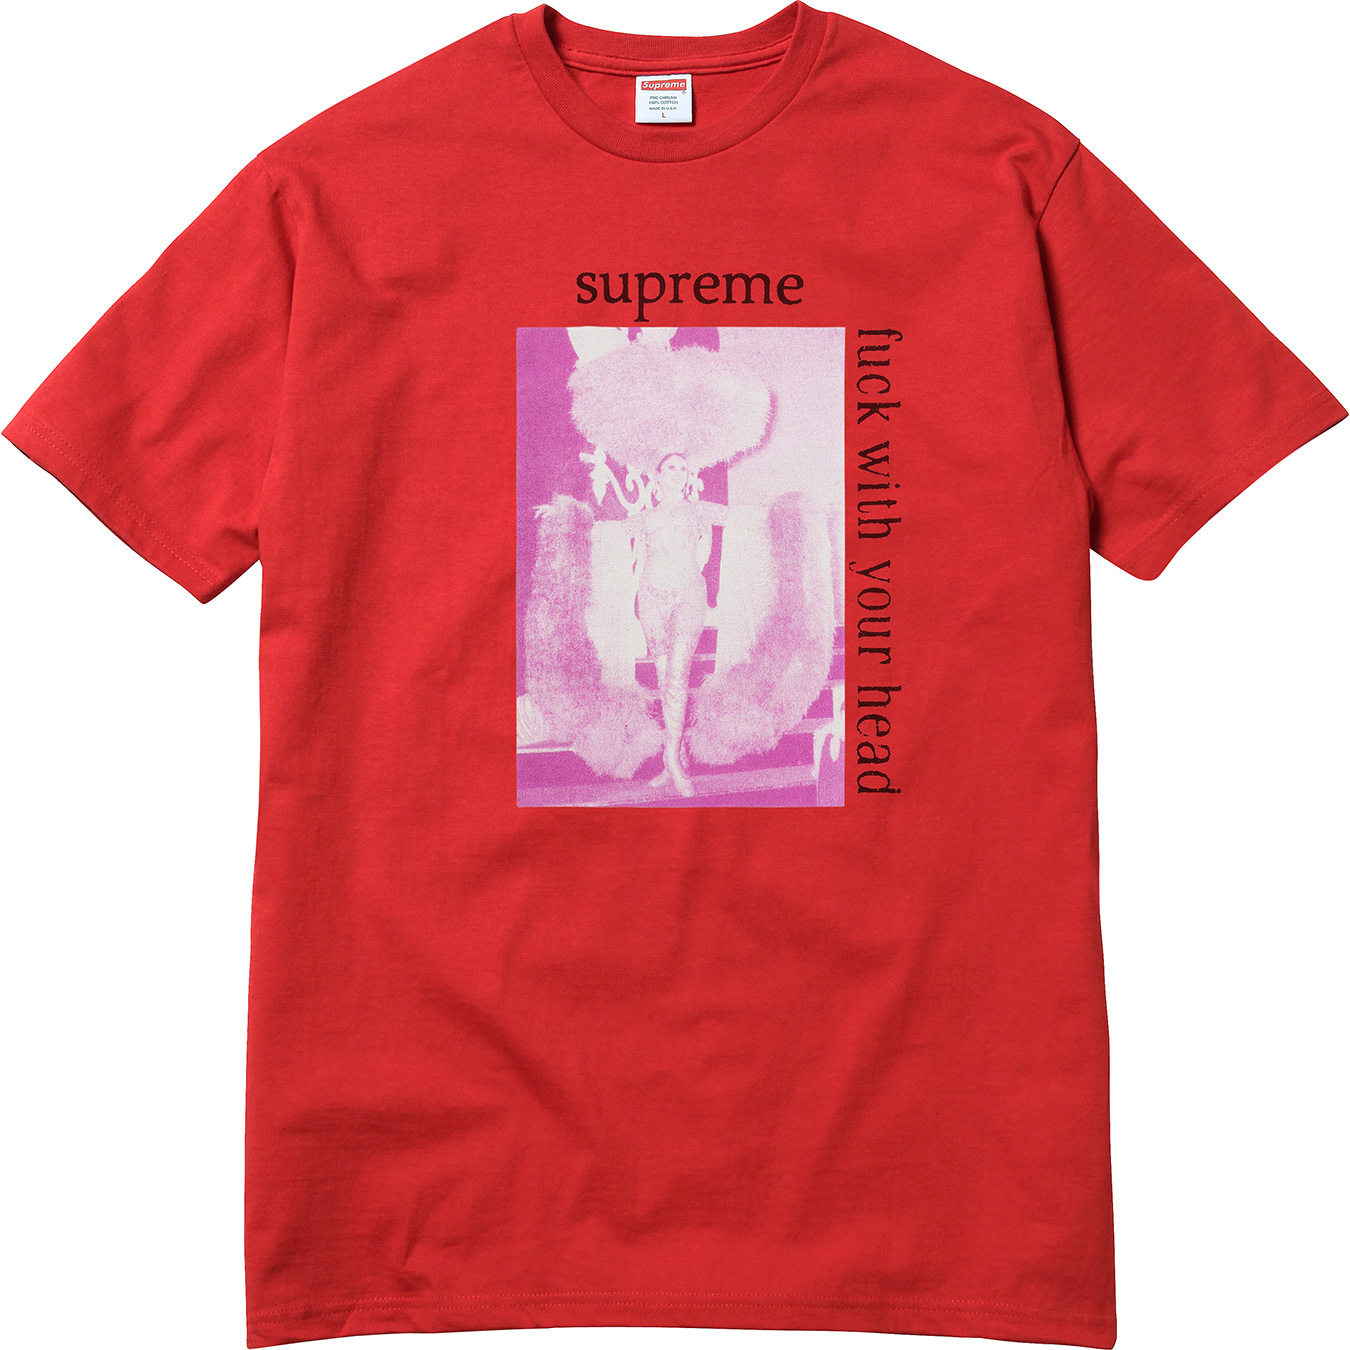 Supreme Fuck With Your Head Tee Red Men's - FW17 - US